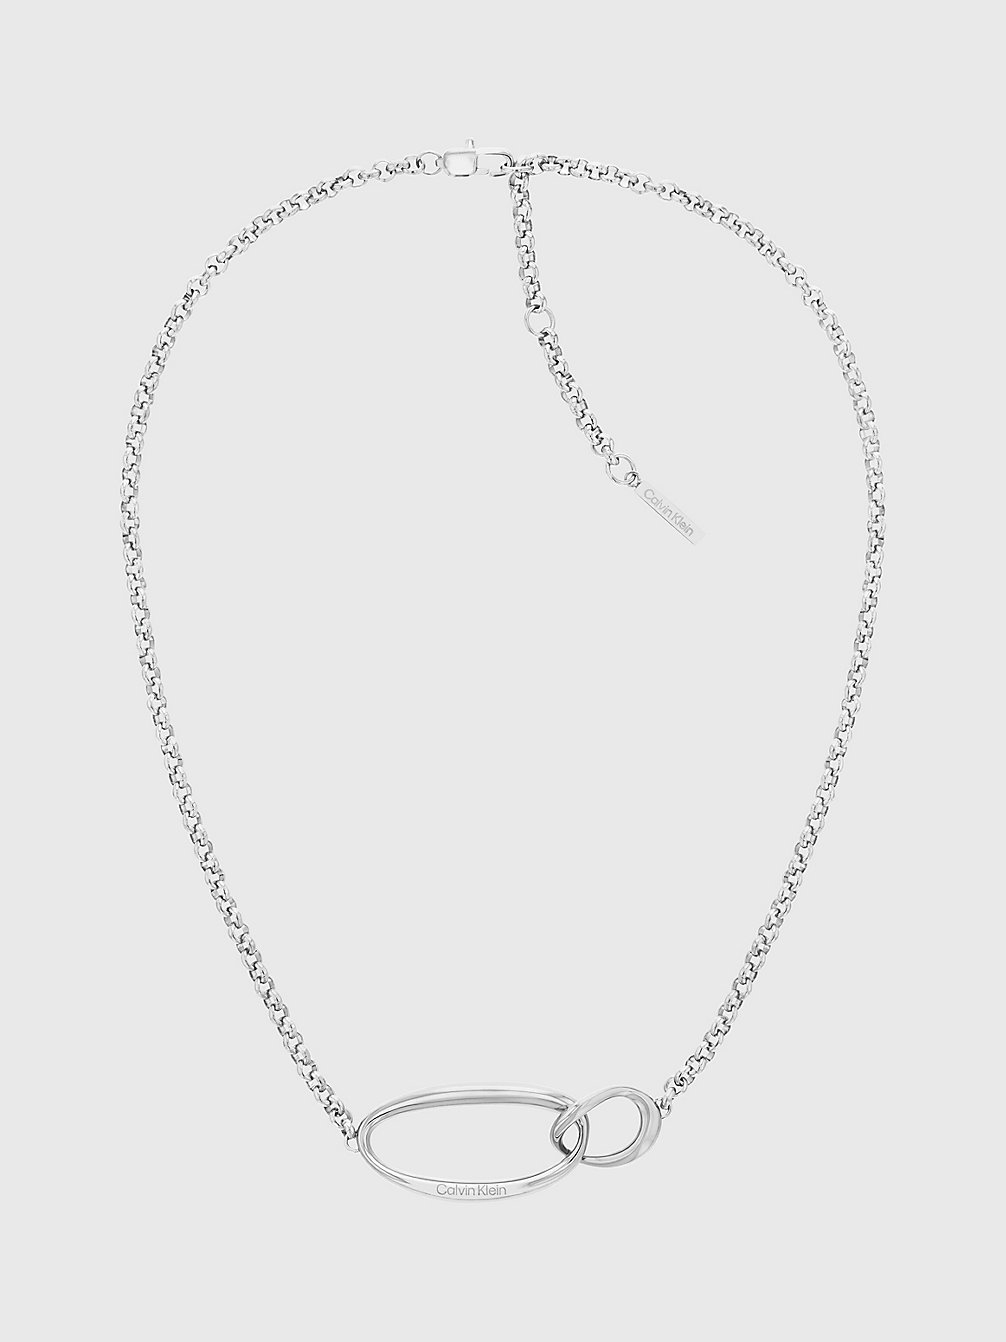 Collar - Playful Organic Shapes > SILVER > undefined mujeres > Calvin Klein